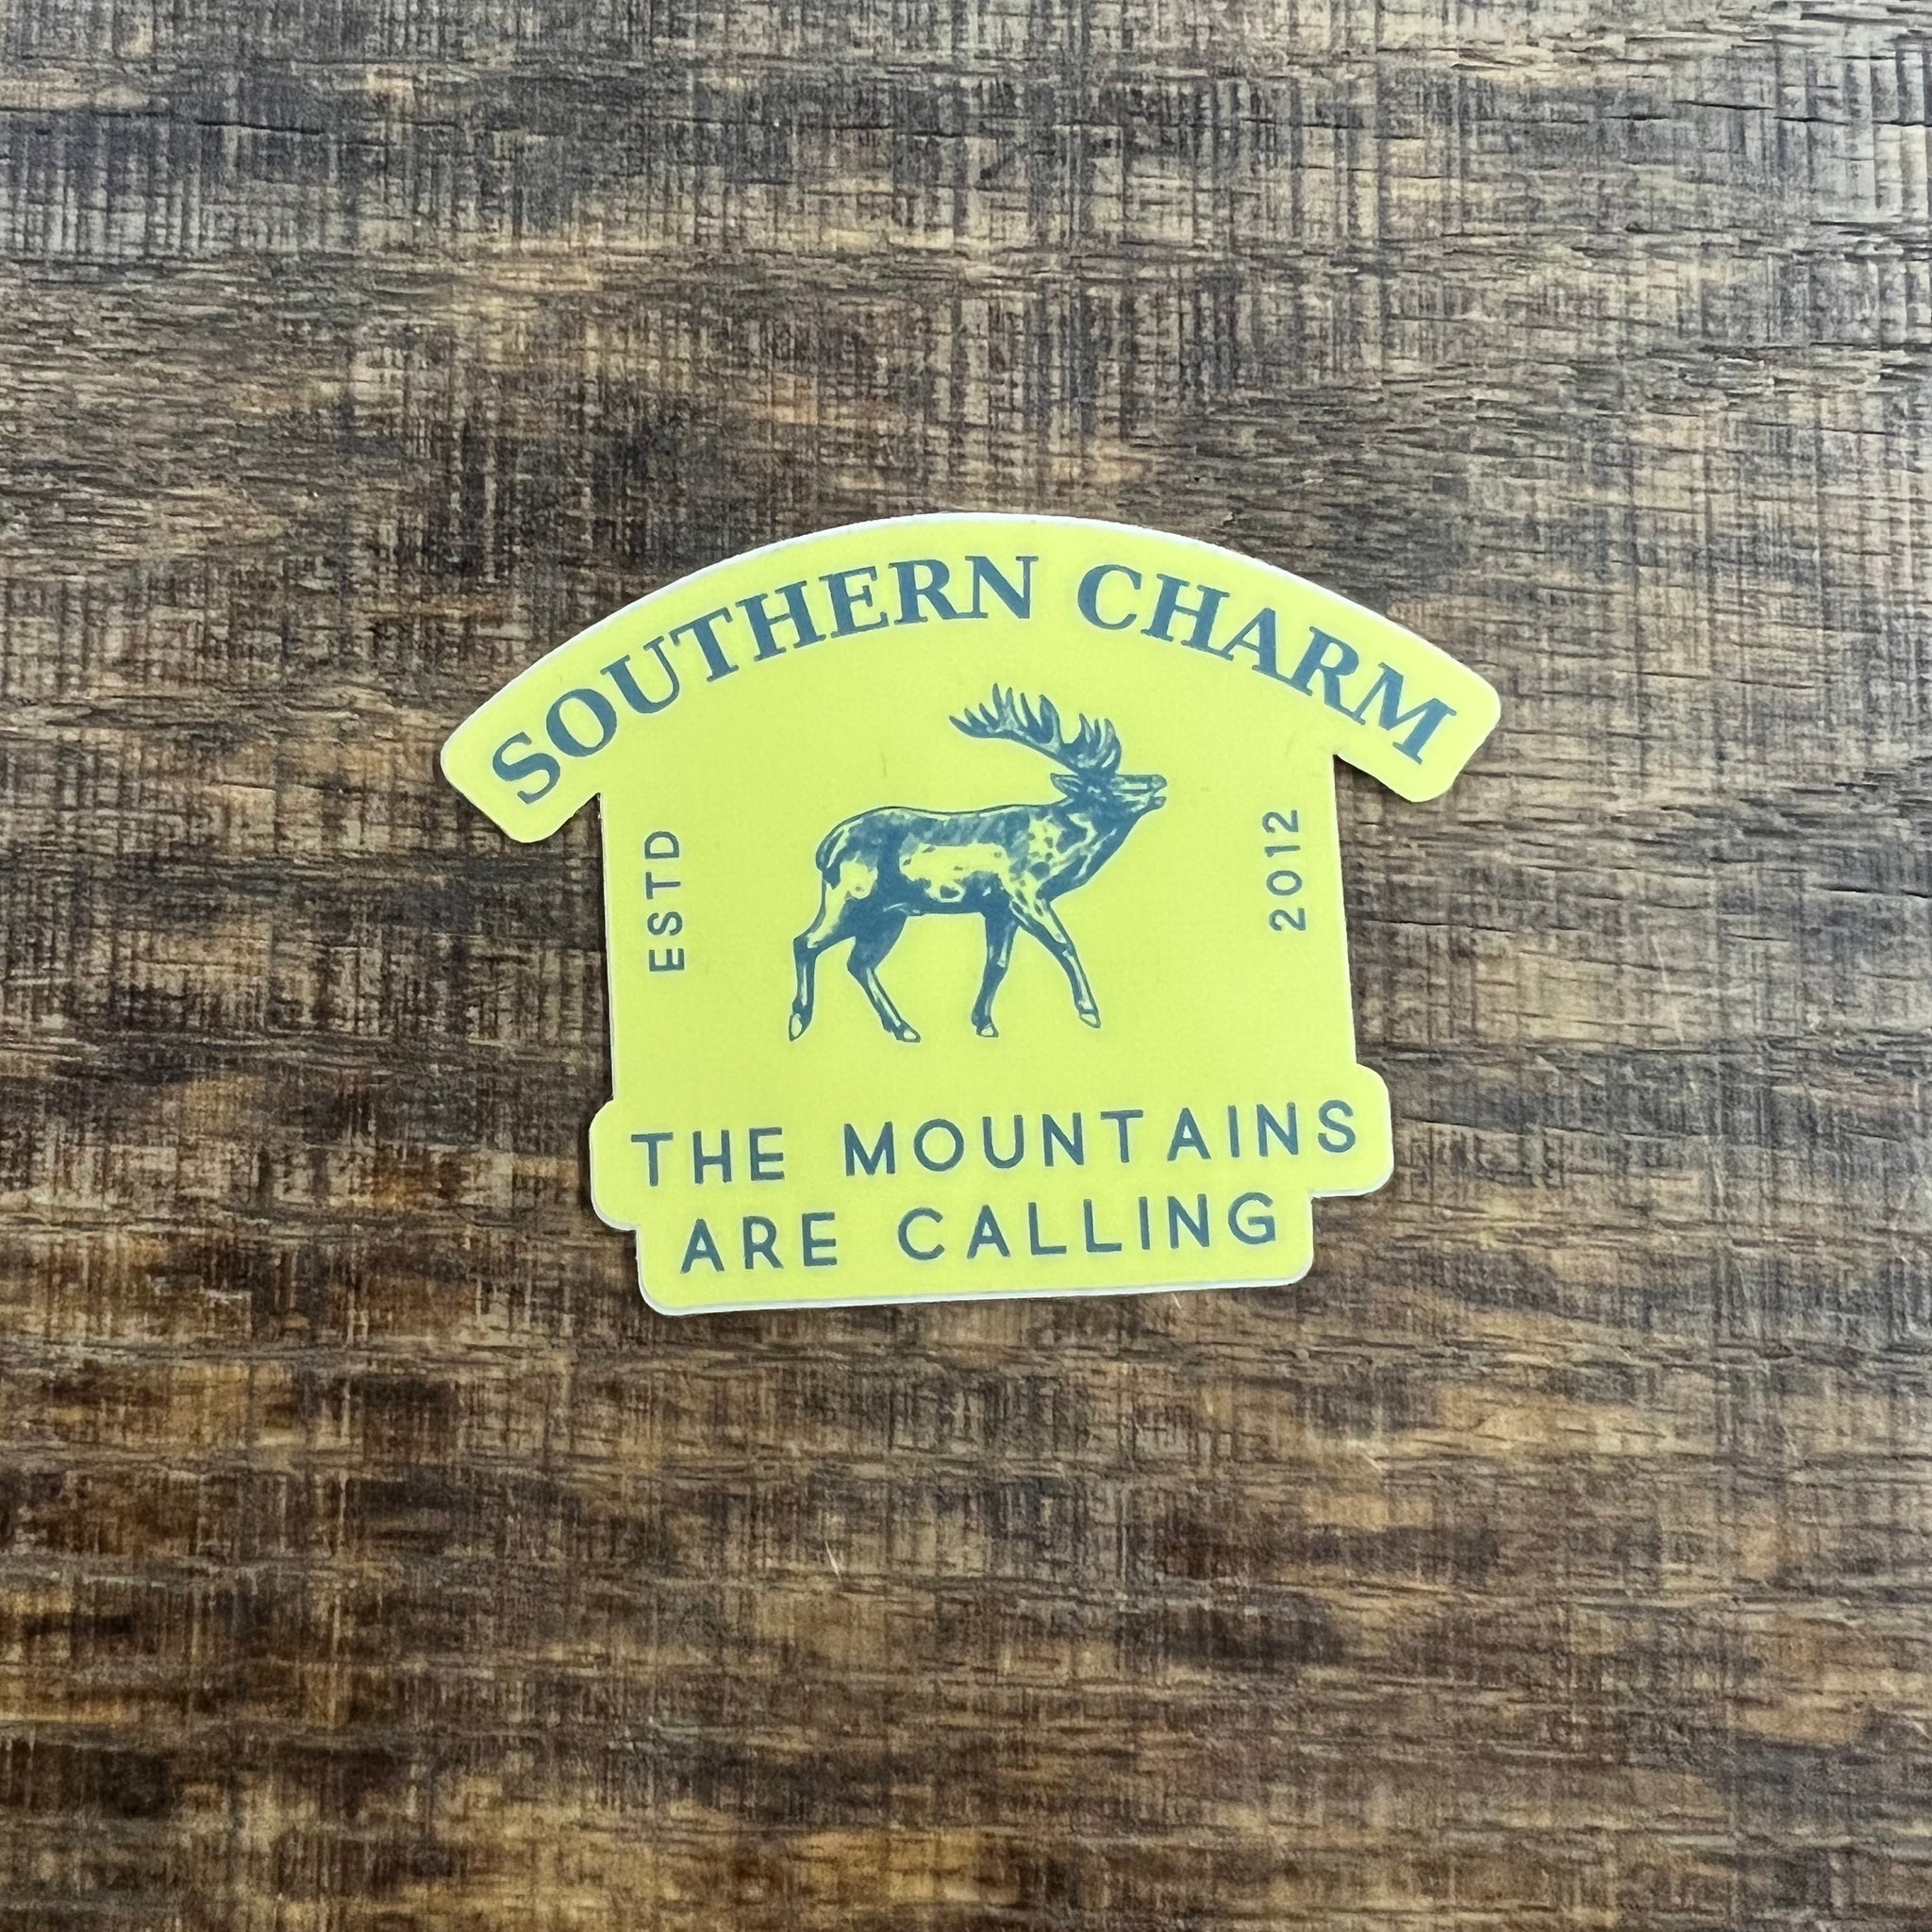 Southern Charm "The Mountains Are Calling" Sticker - Yellow